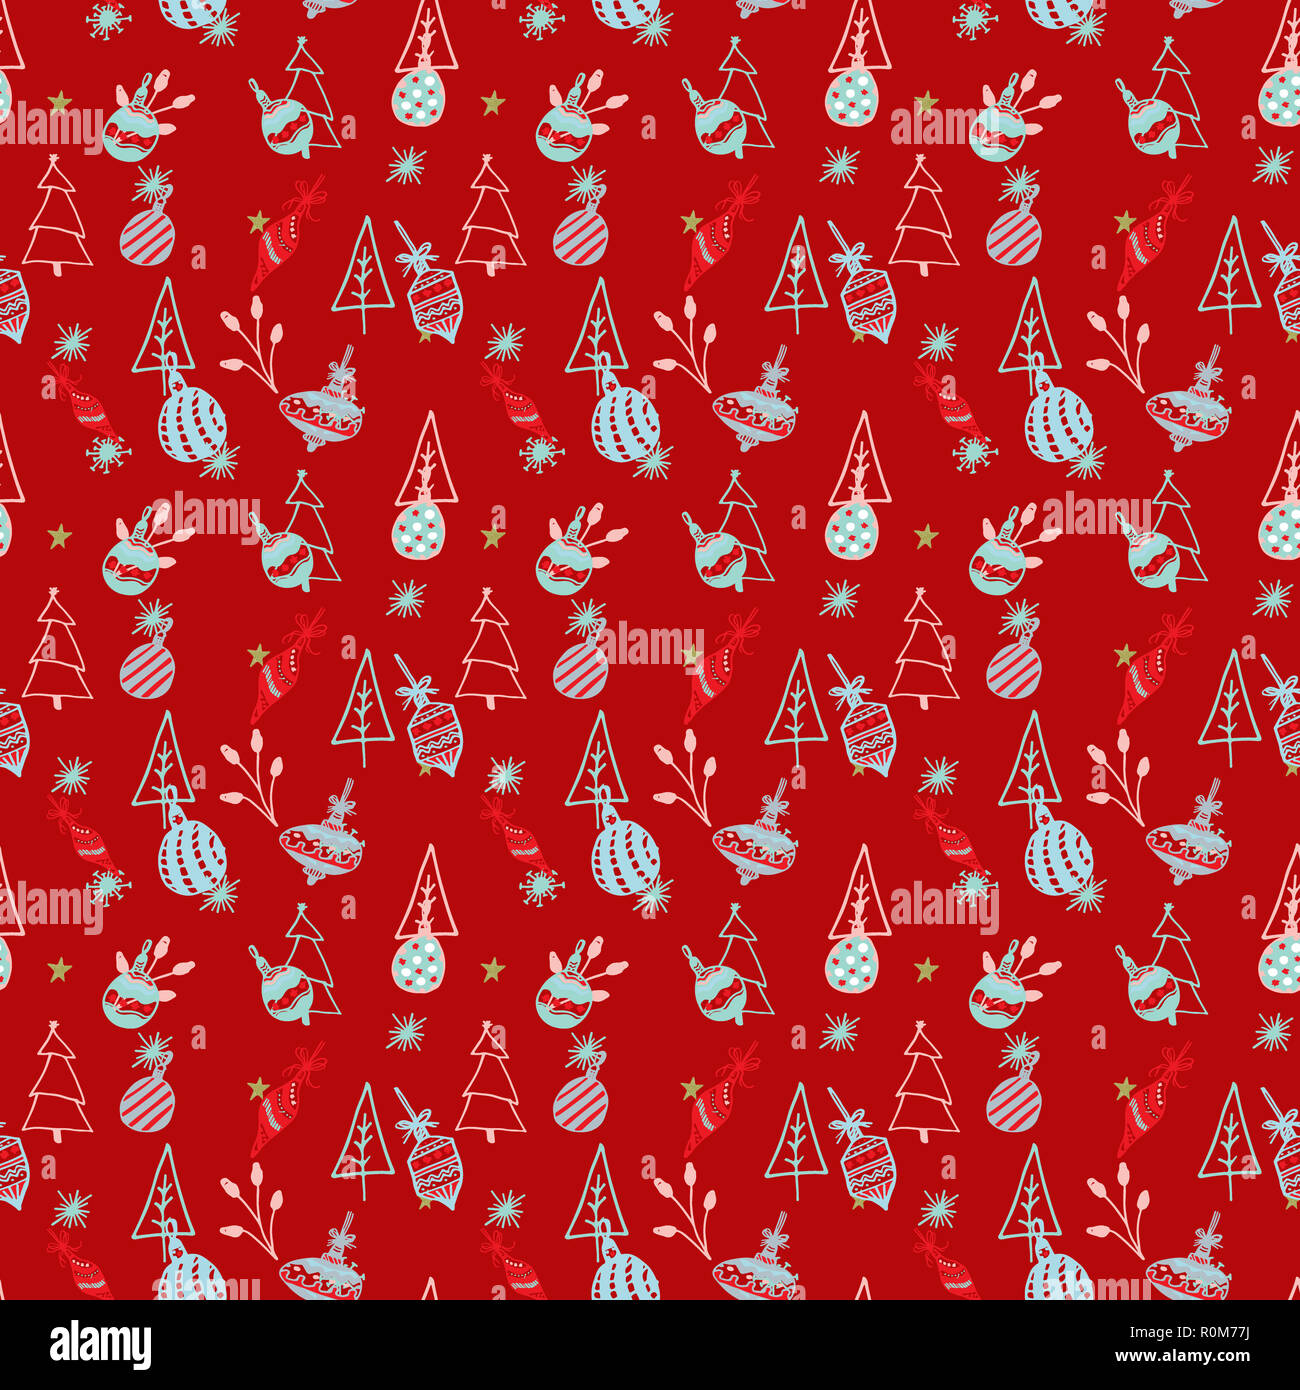 Seamless Christmas and New Year background pattern digital paper. Stock Photo